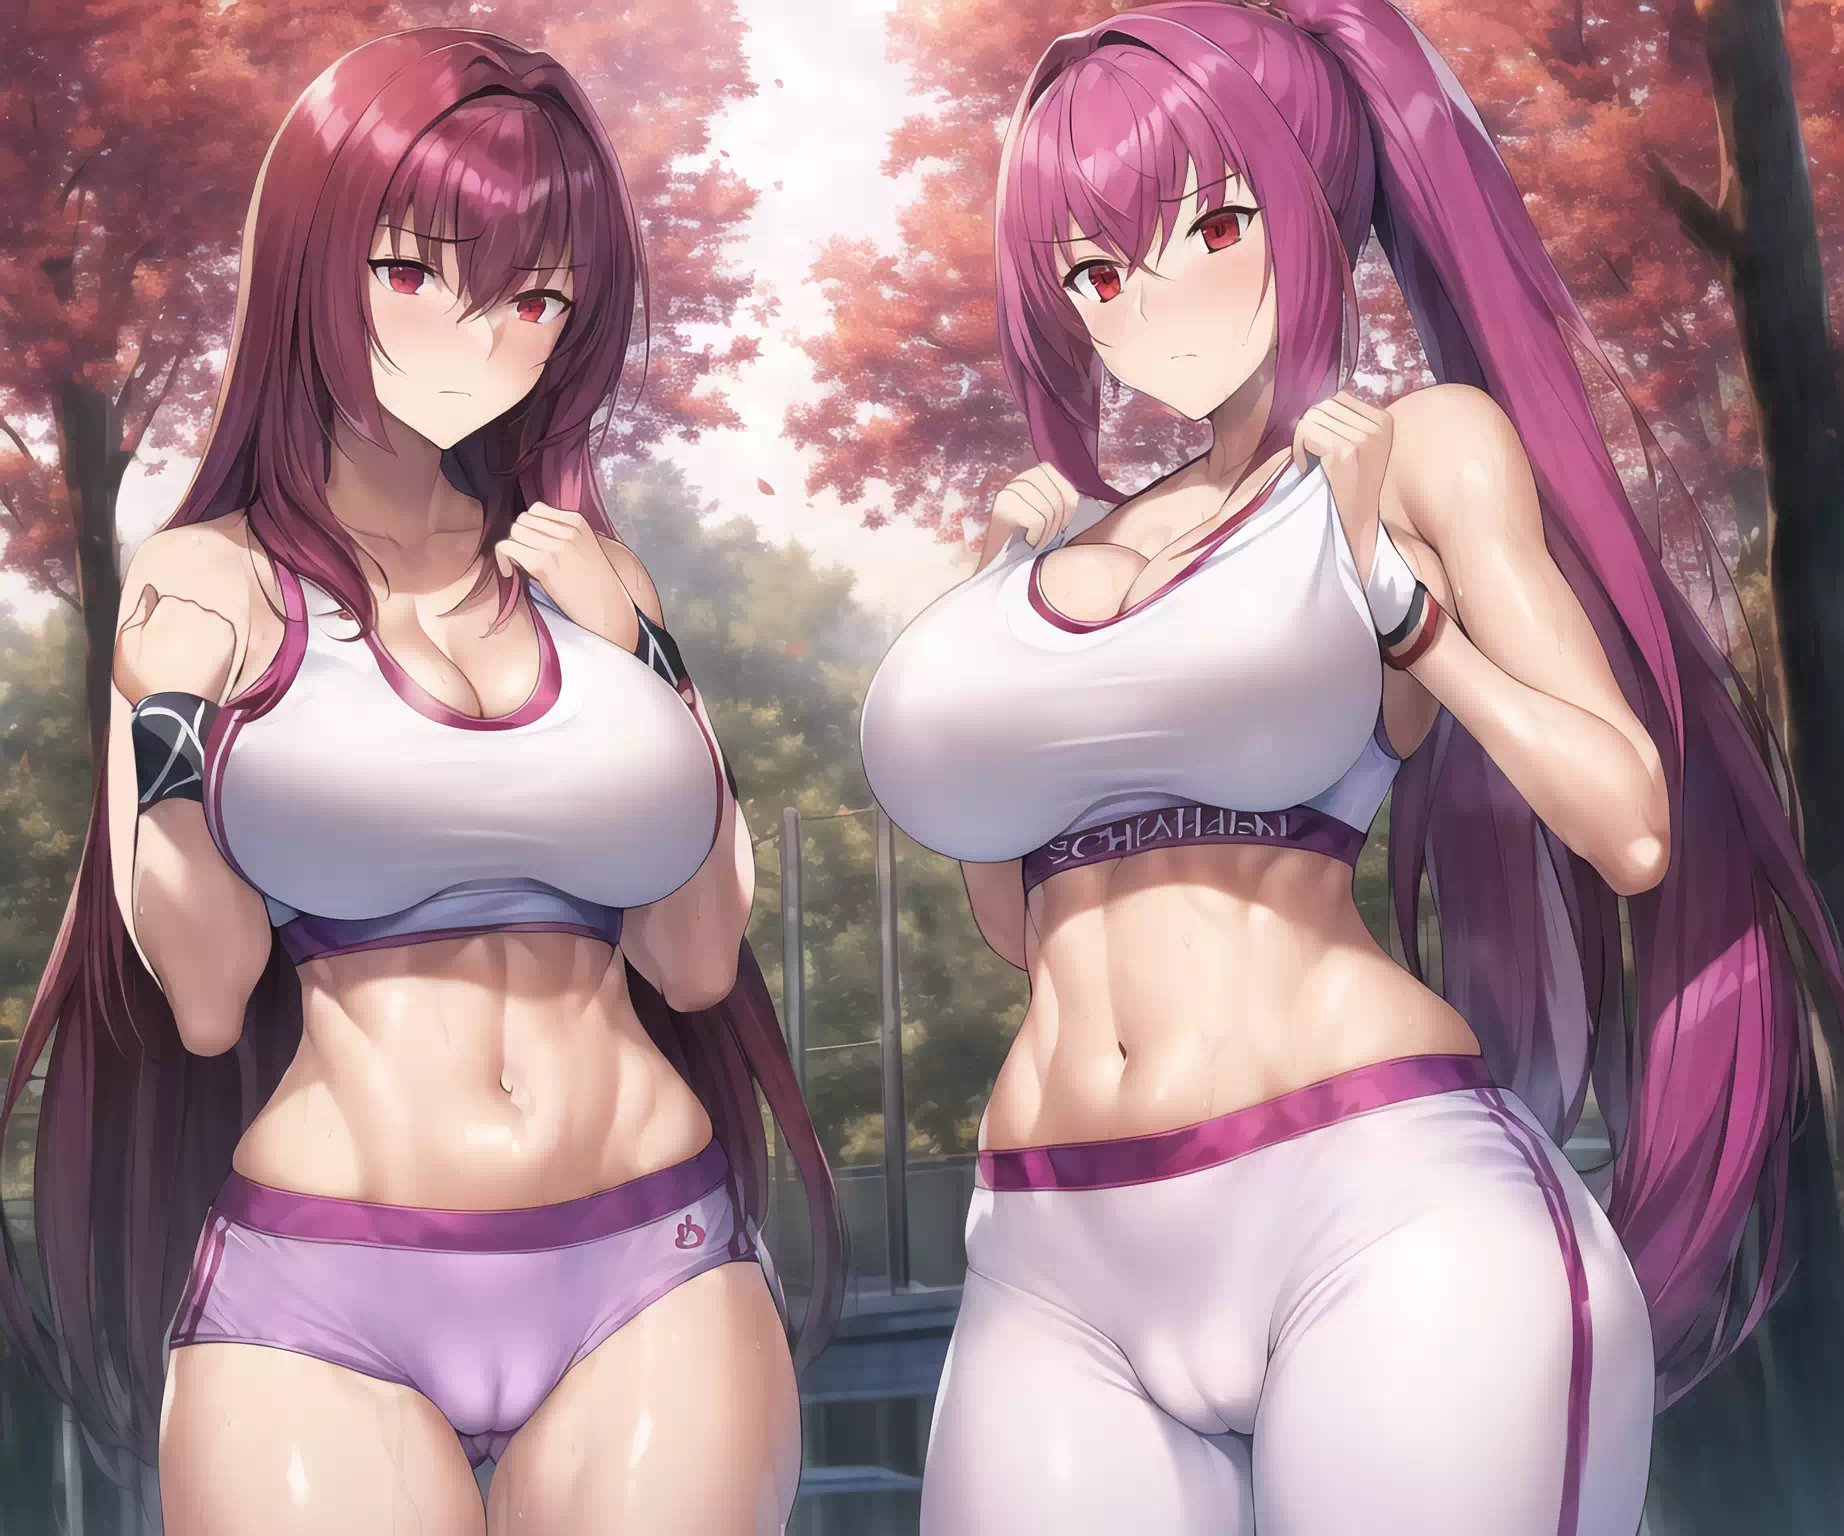 Scathach and Scathach=Skadi